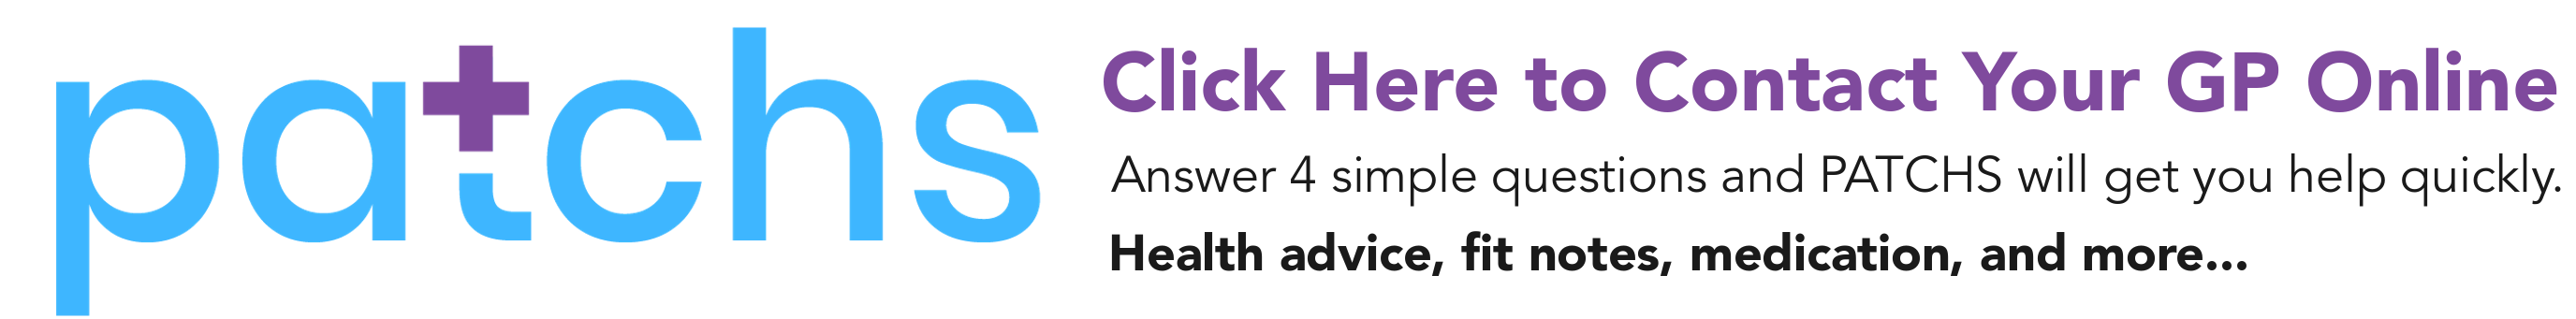 Patchs. Click here to contact your GP online. Answer 4 simple questions and PATCHS will get you help quickly. Health advice, fit notes, medication and more...